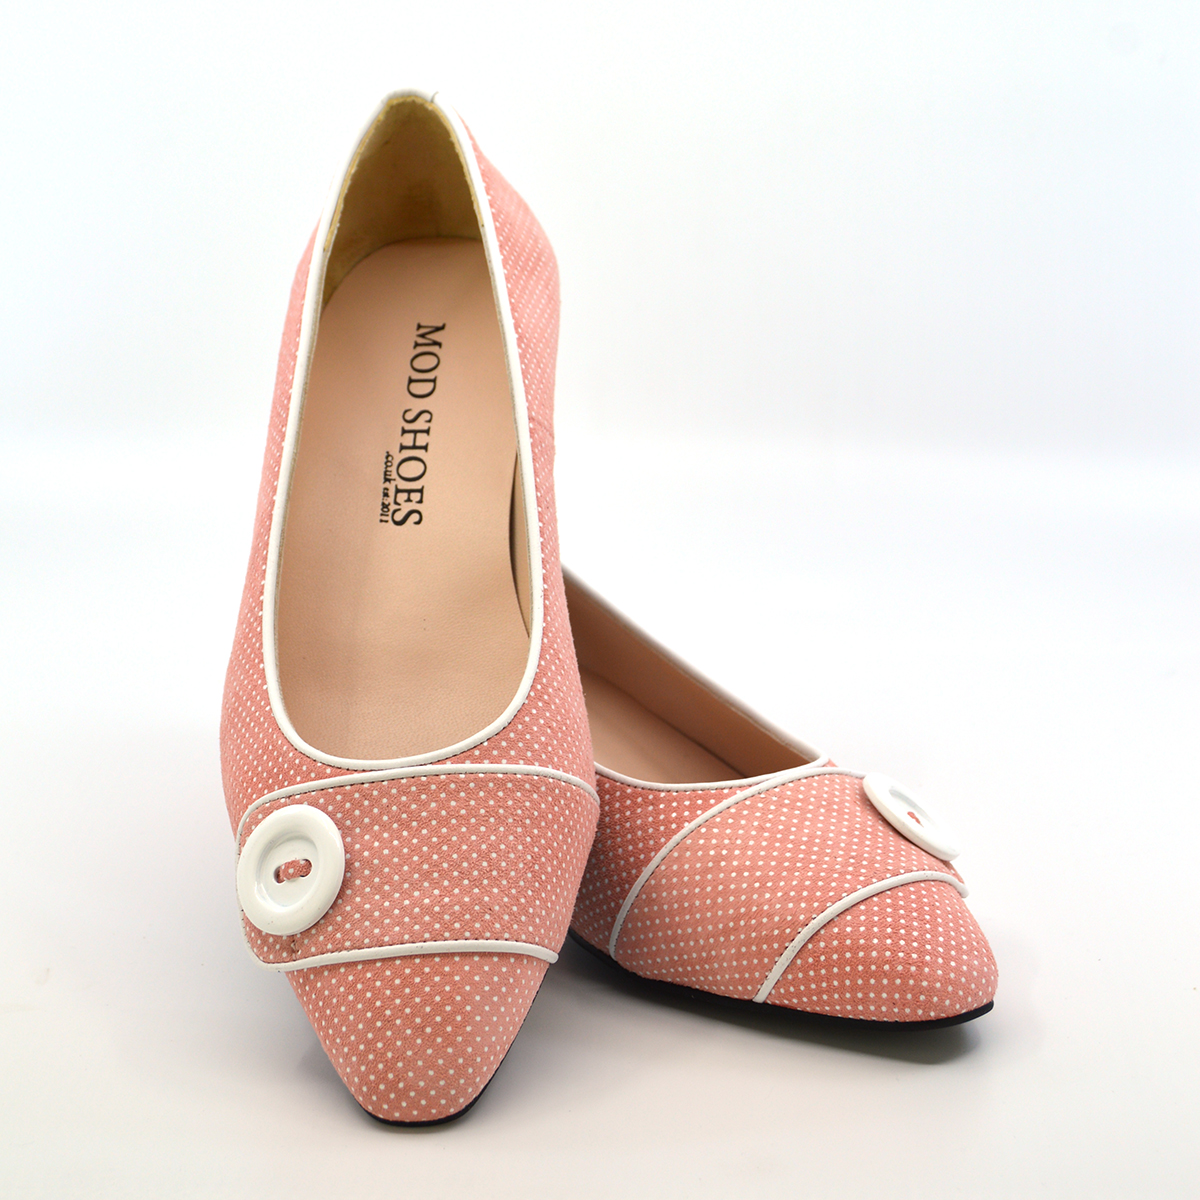 pink suede shoes uk